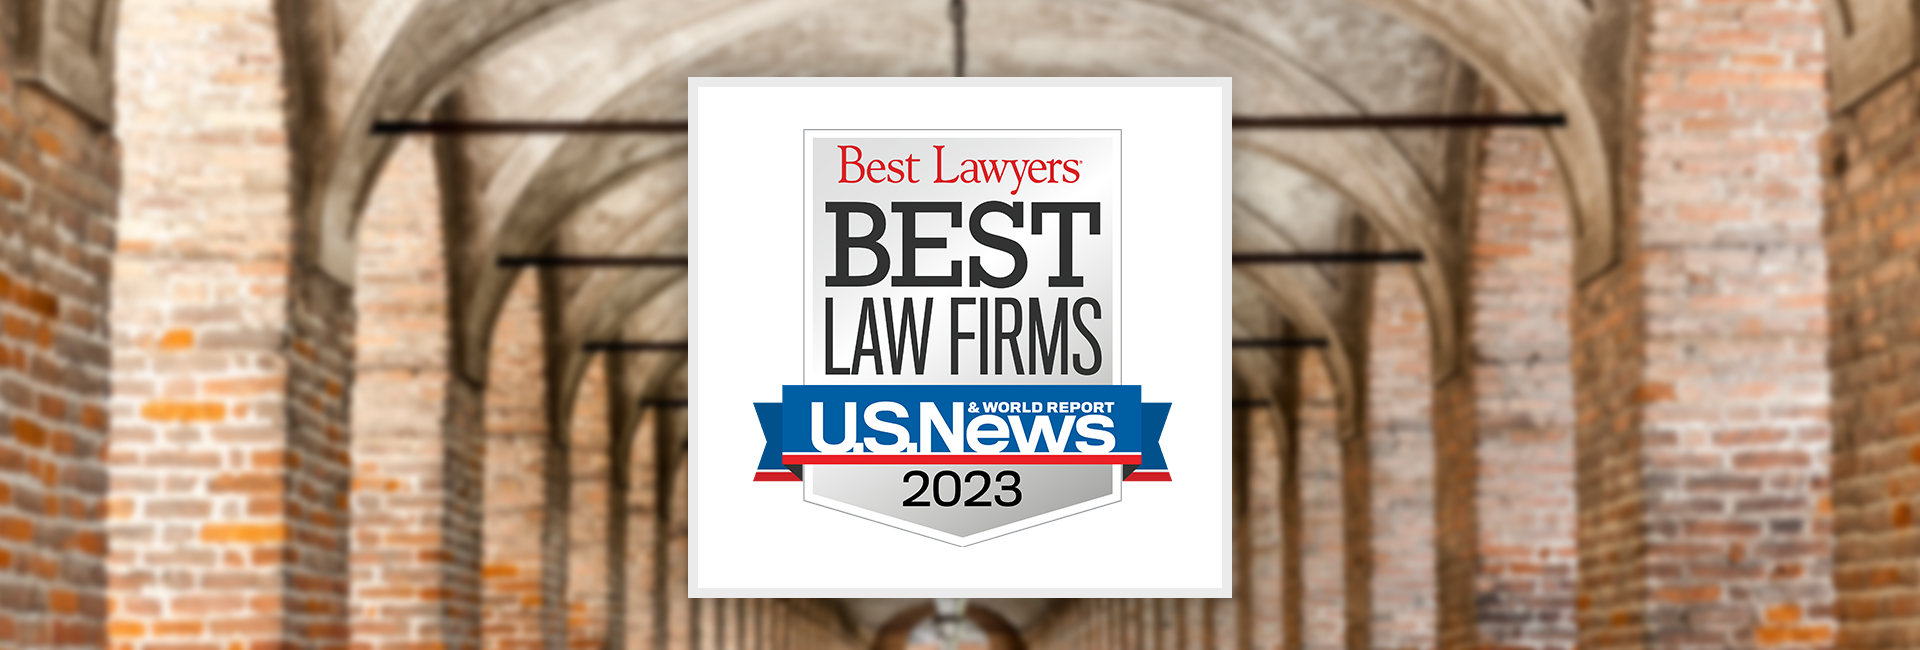 Best Law Firms US News 2023